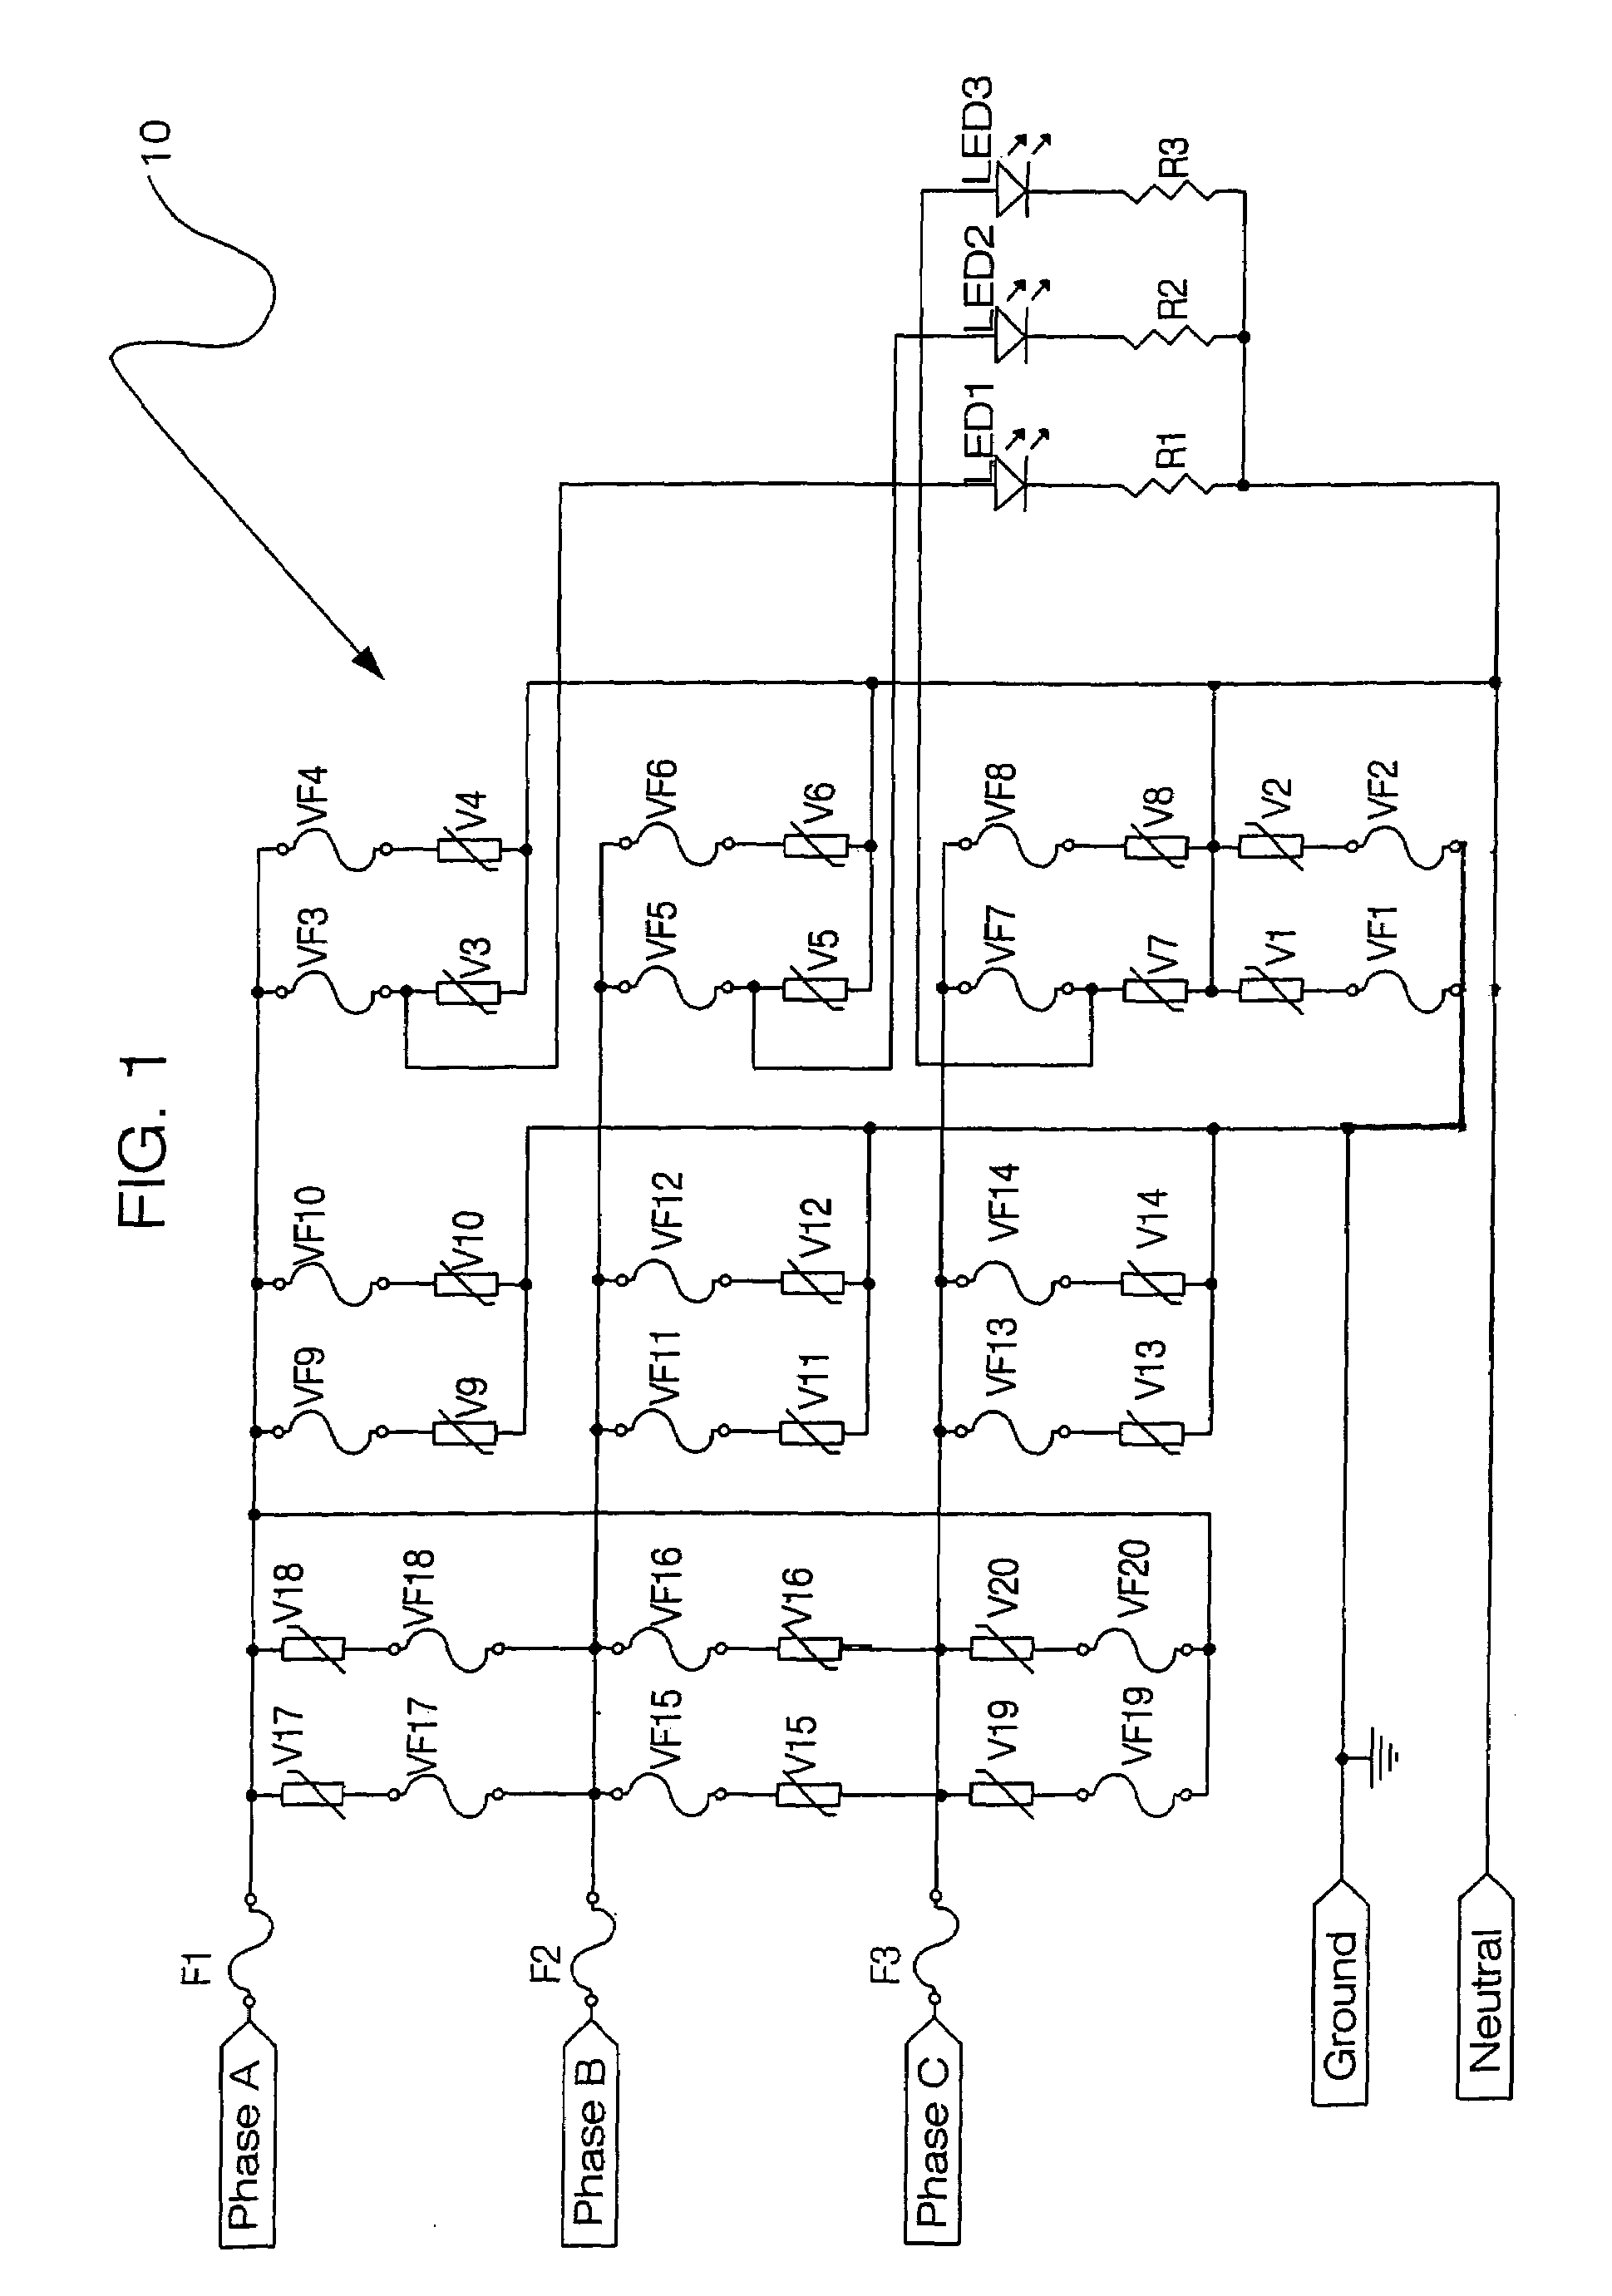 Apparatus and method for fusing voltage surge and transient anomalies in a surge suppression device